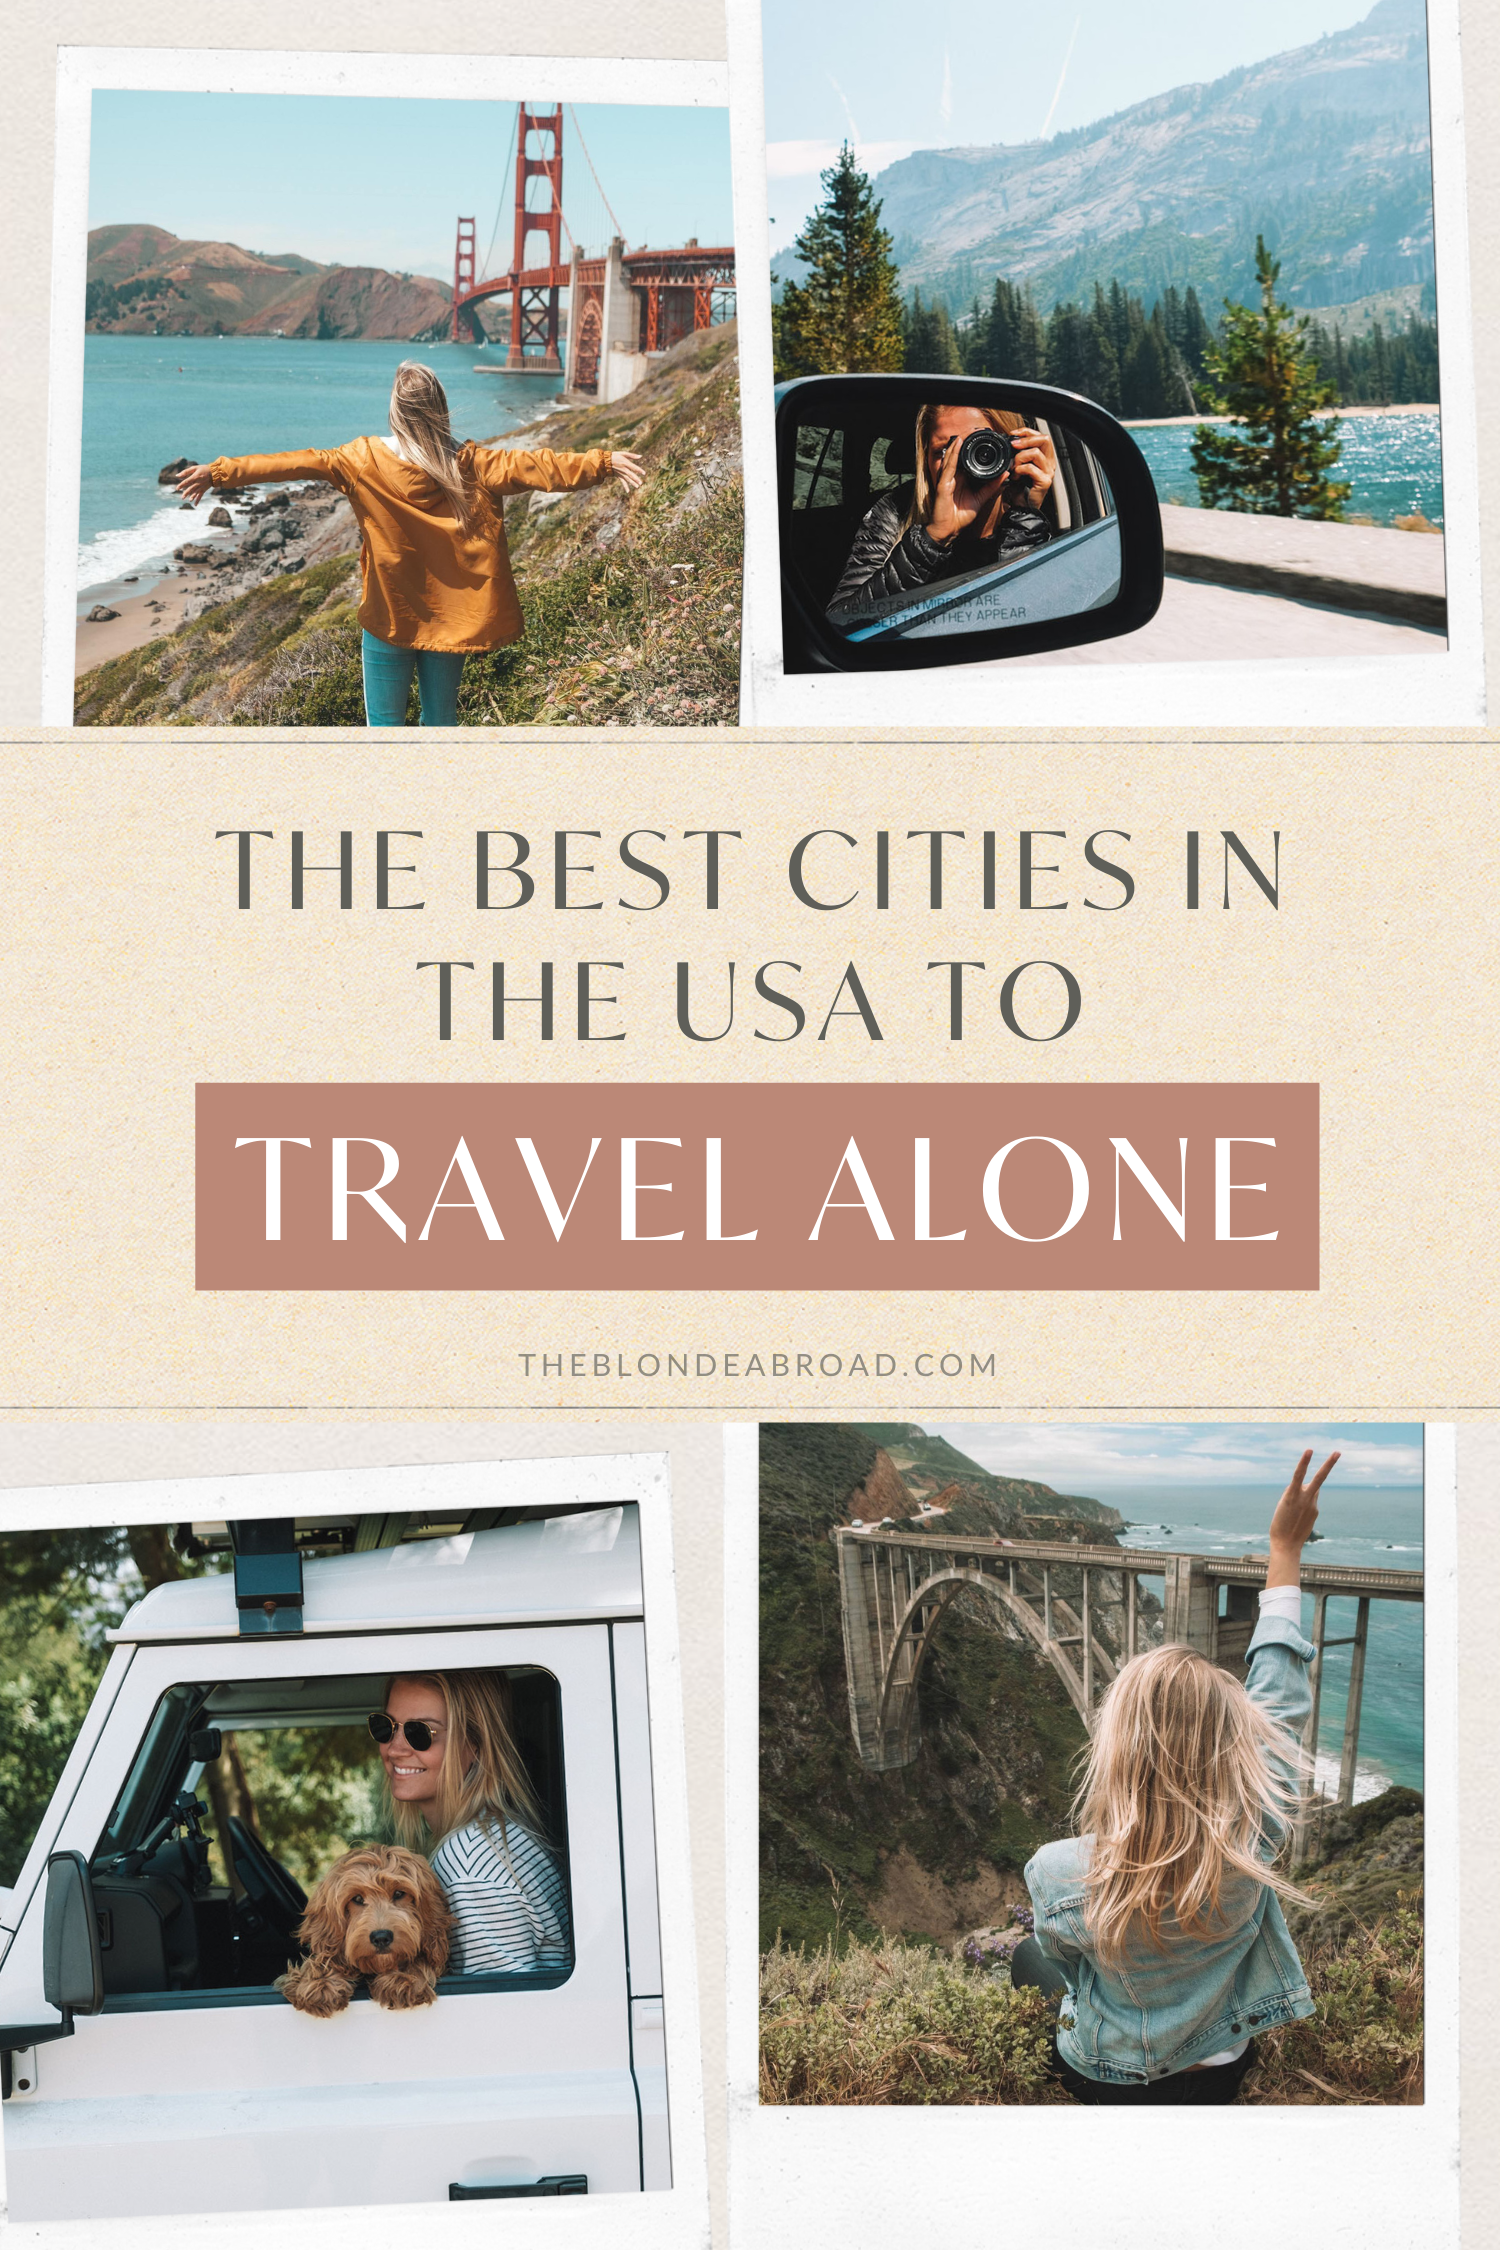 The Best Cities to Travel Alone in the USA